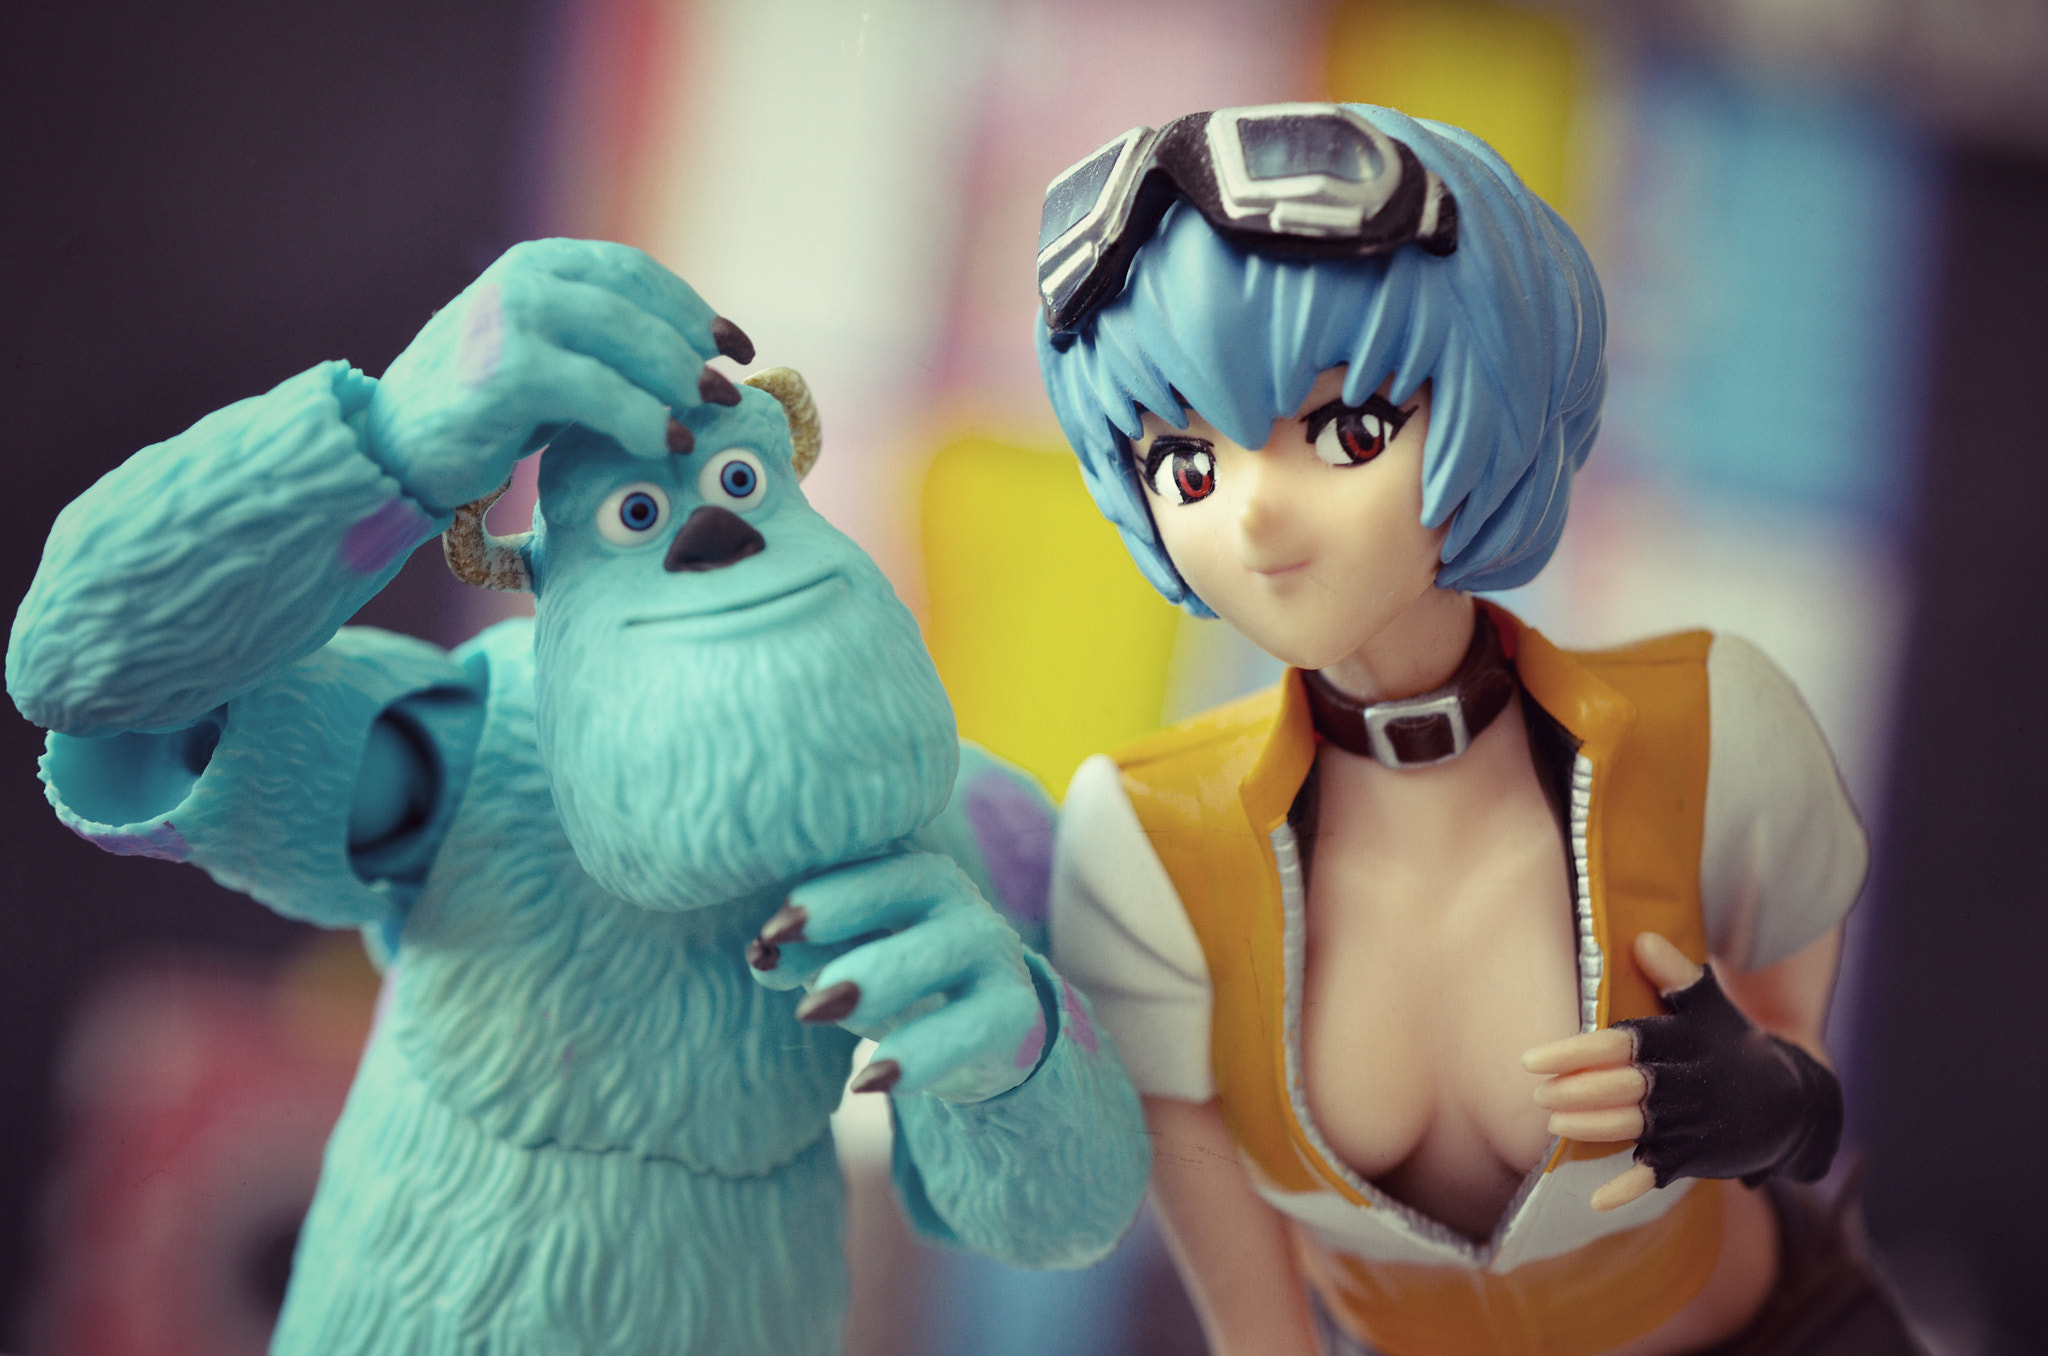 Sully and girl